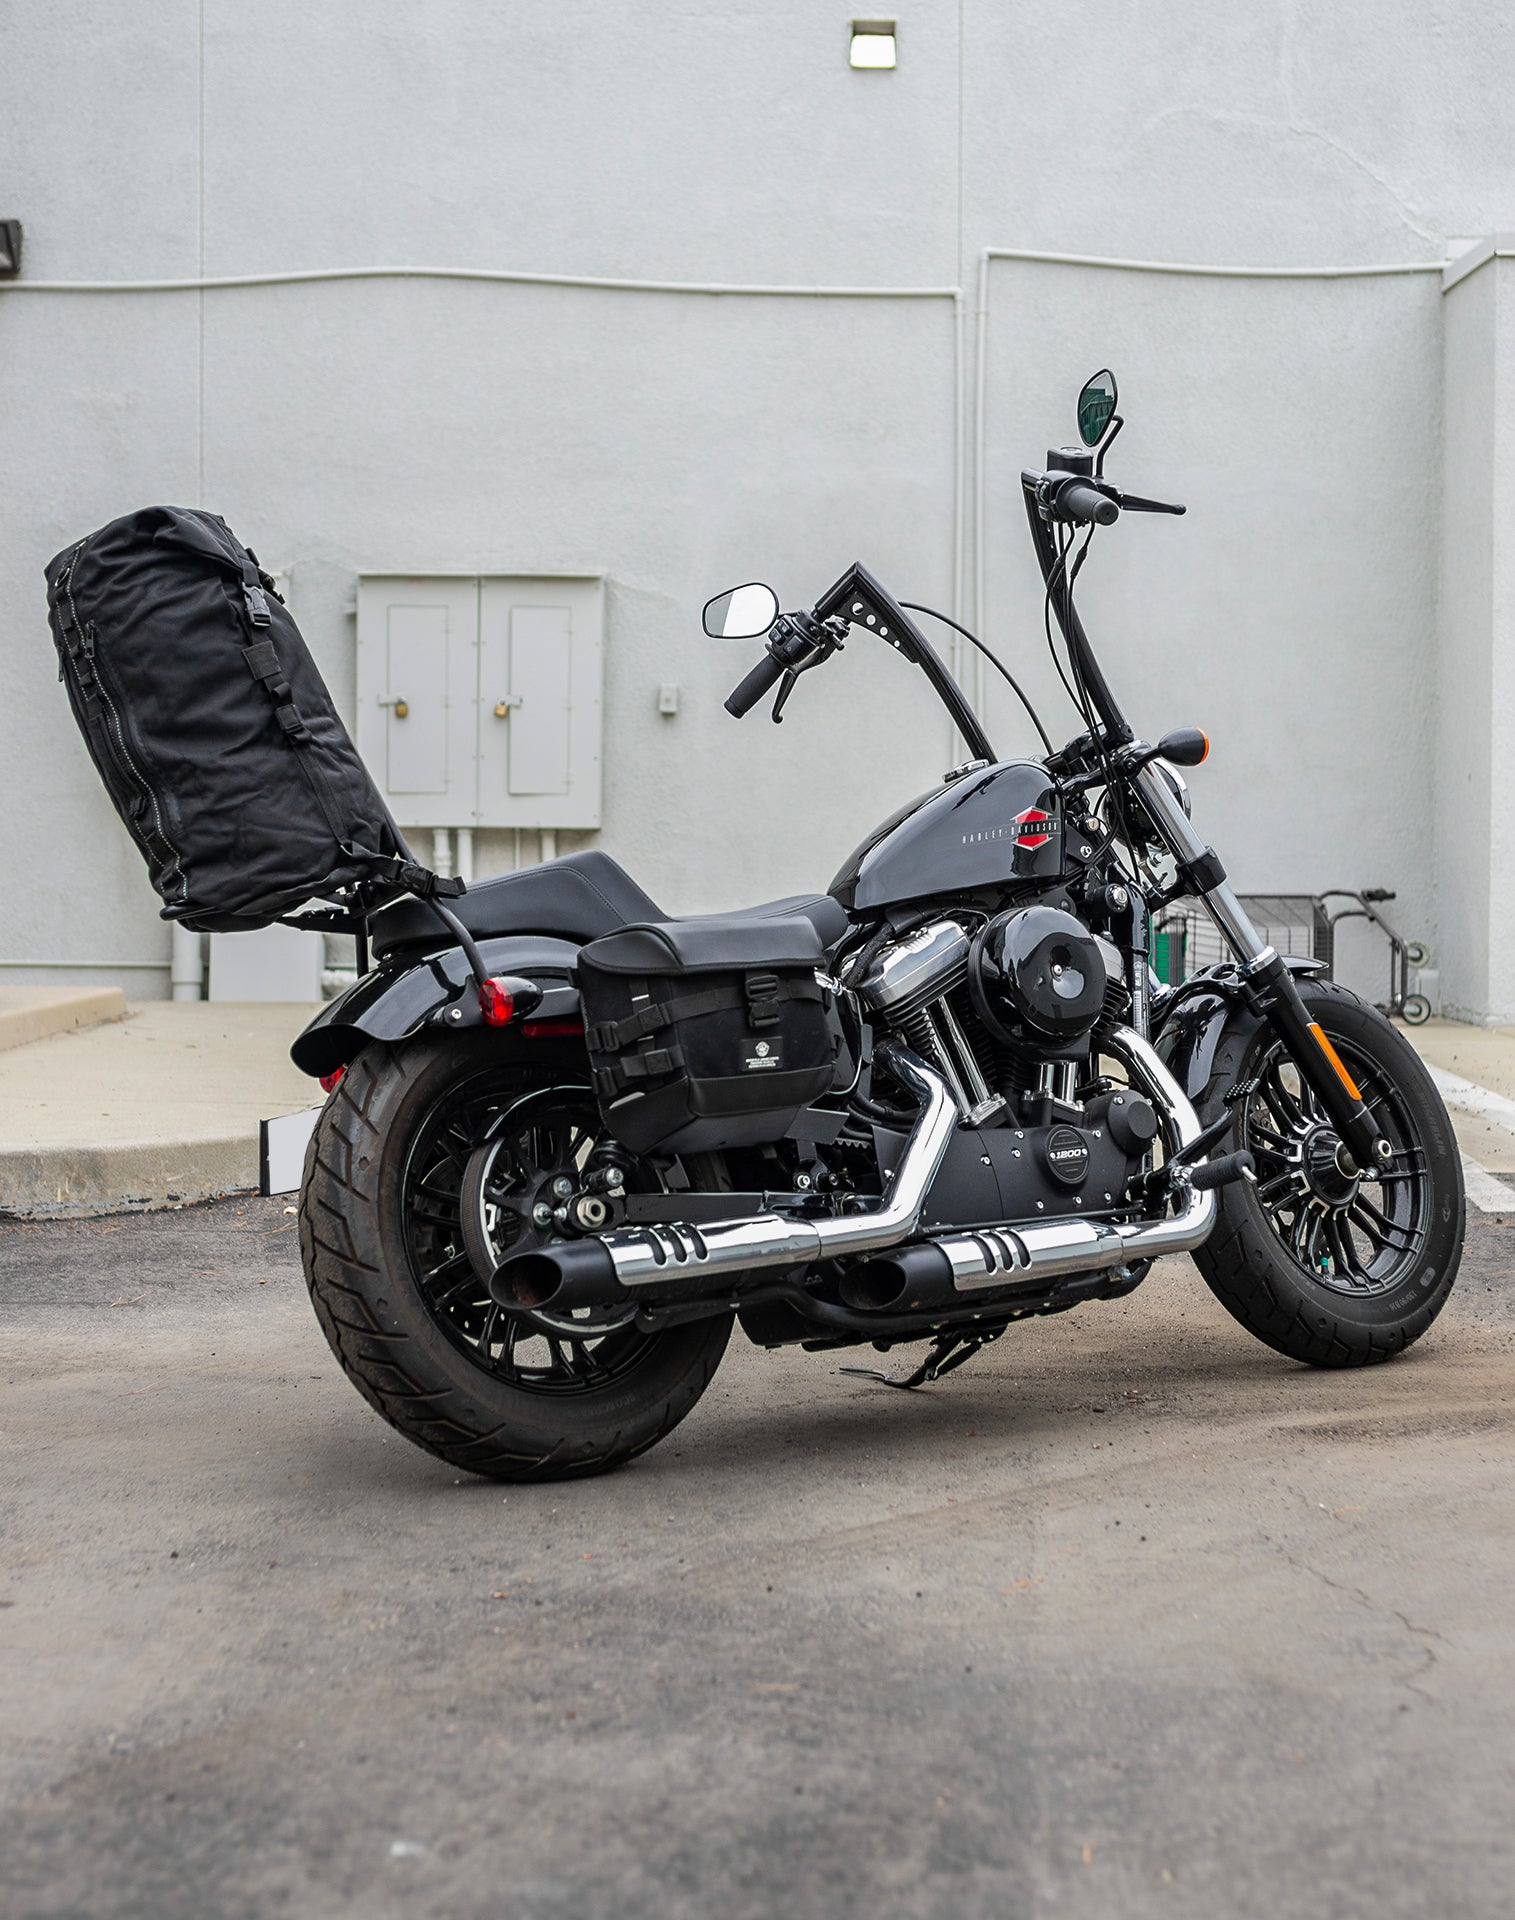 35L - Renegade XL Motorcycle Dry Backpack